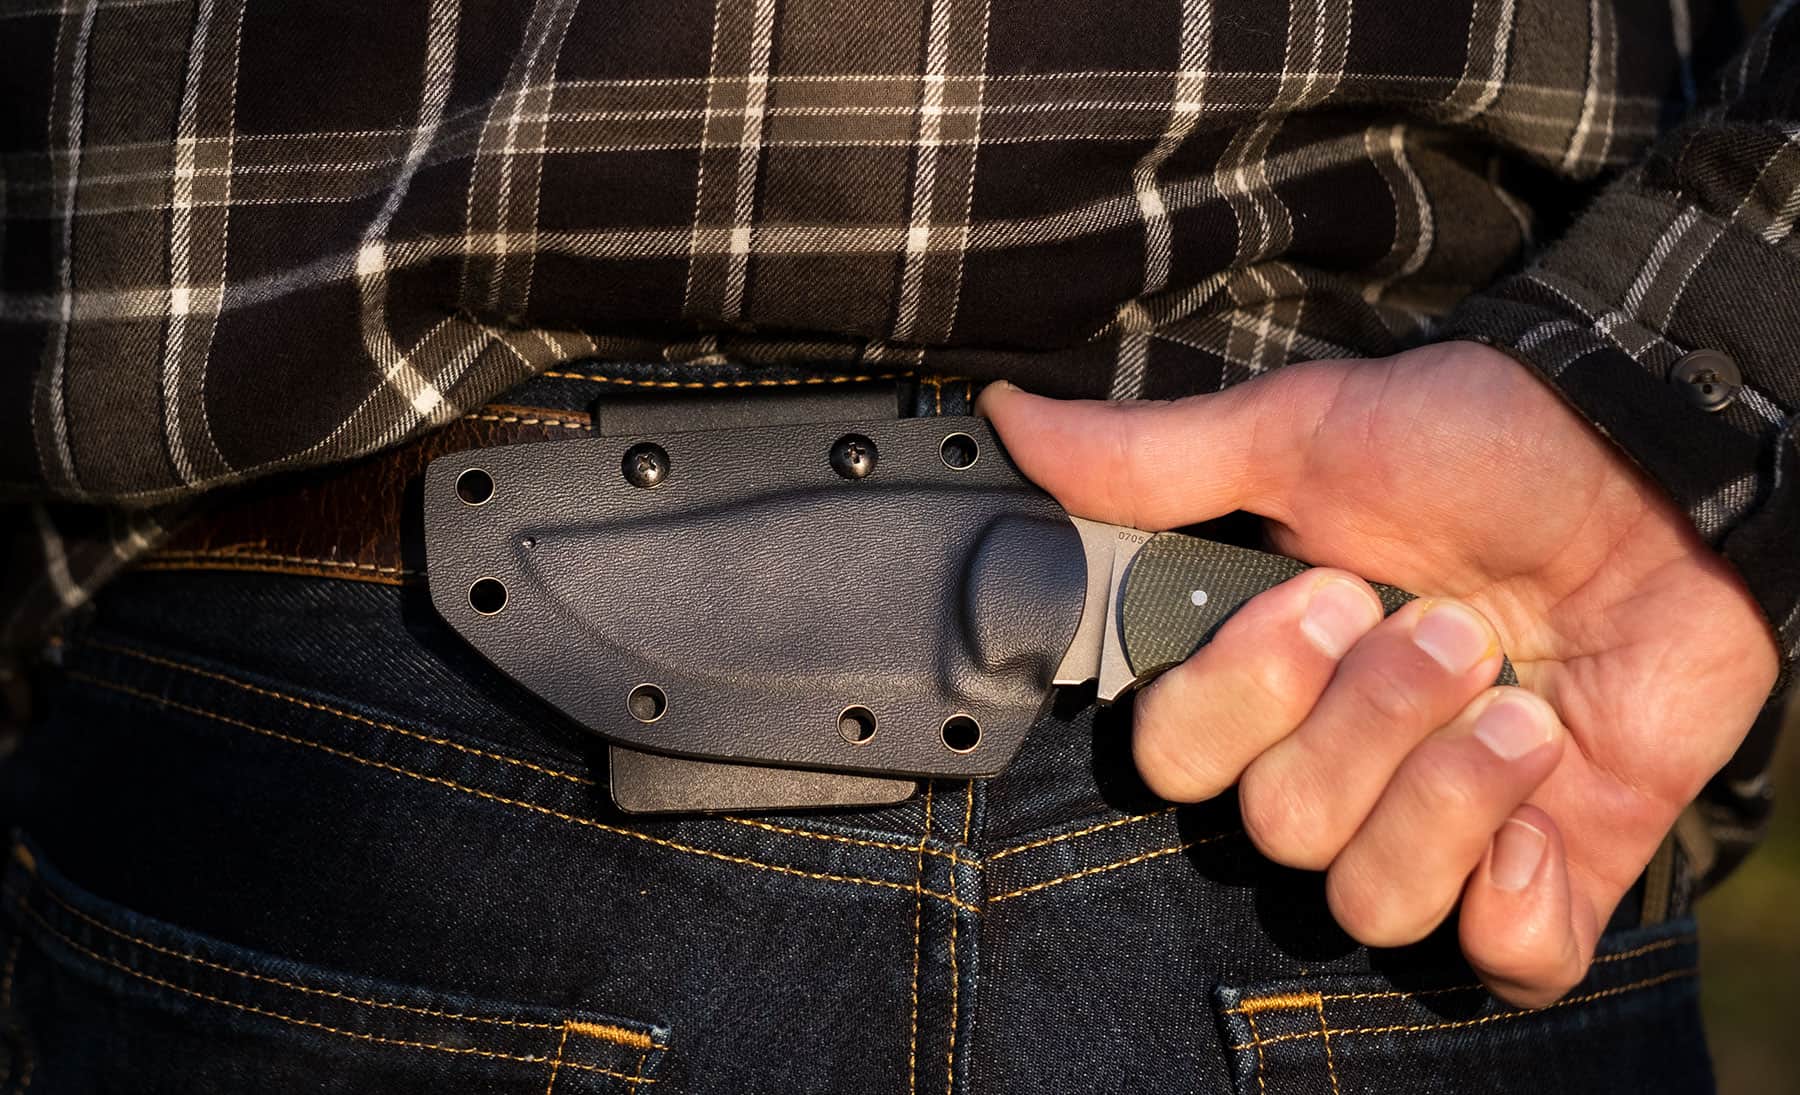 The Boker Plus Madman fixed blade knife set up for horizontal scout carry on a person's belt.